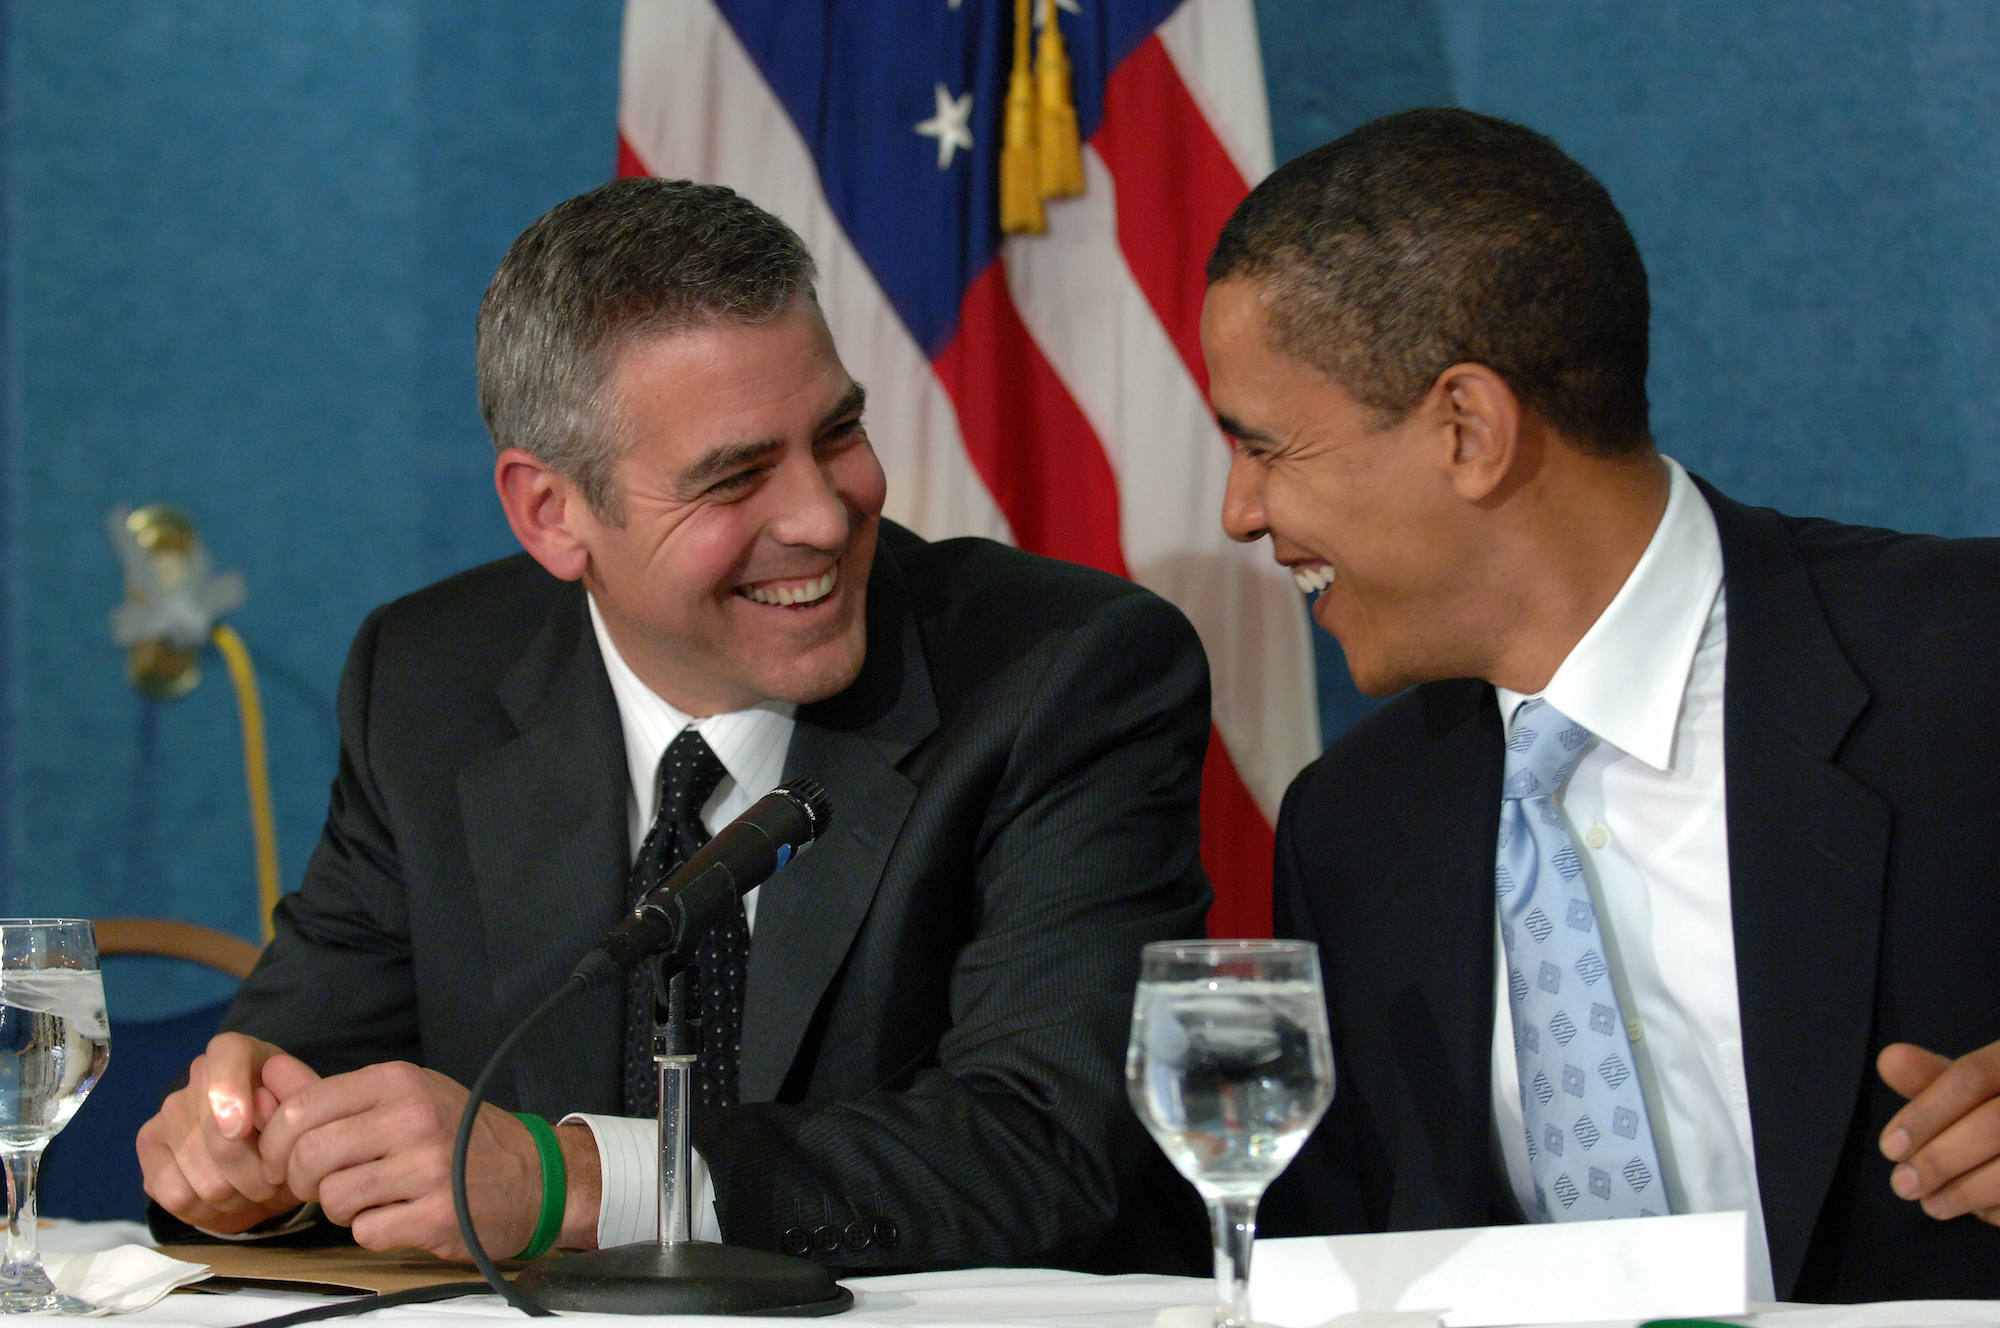 George Clooney and Barack Obama looking at each other laughing